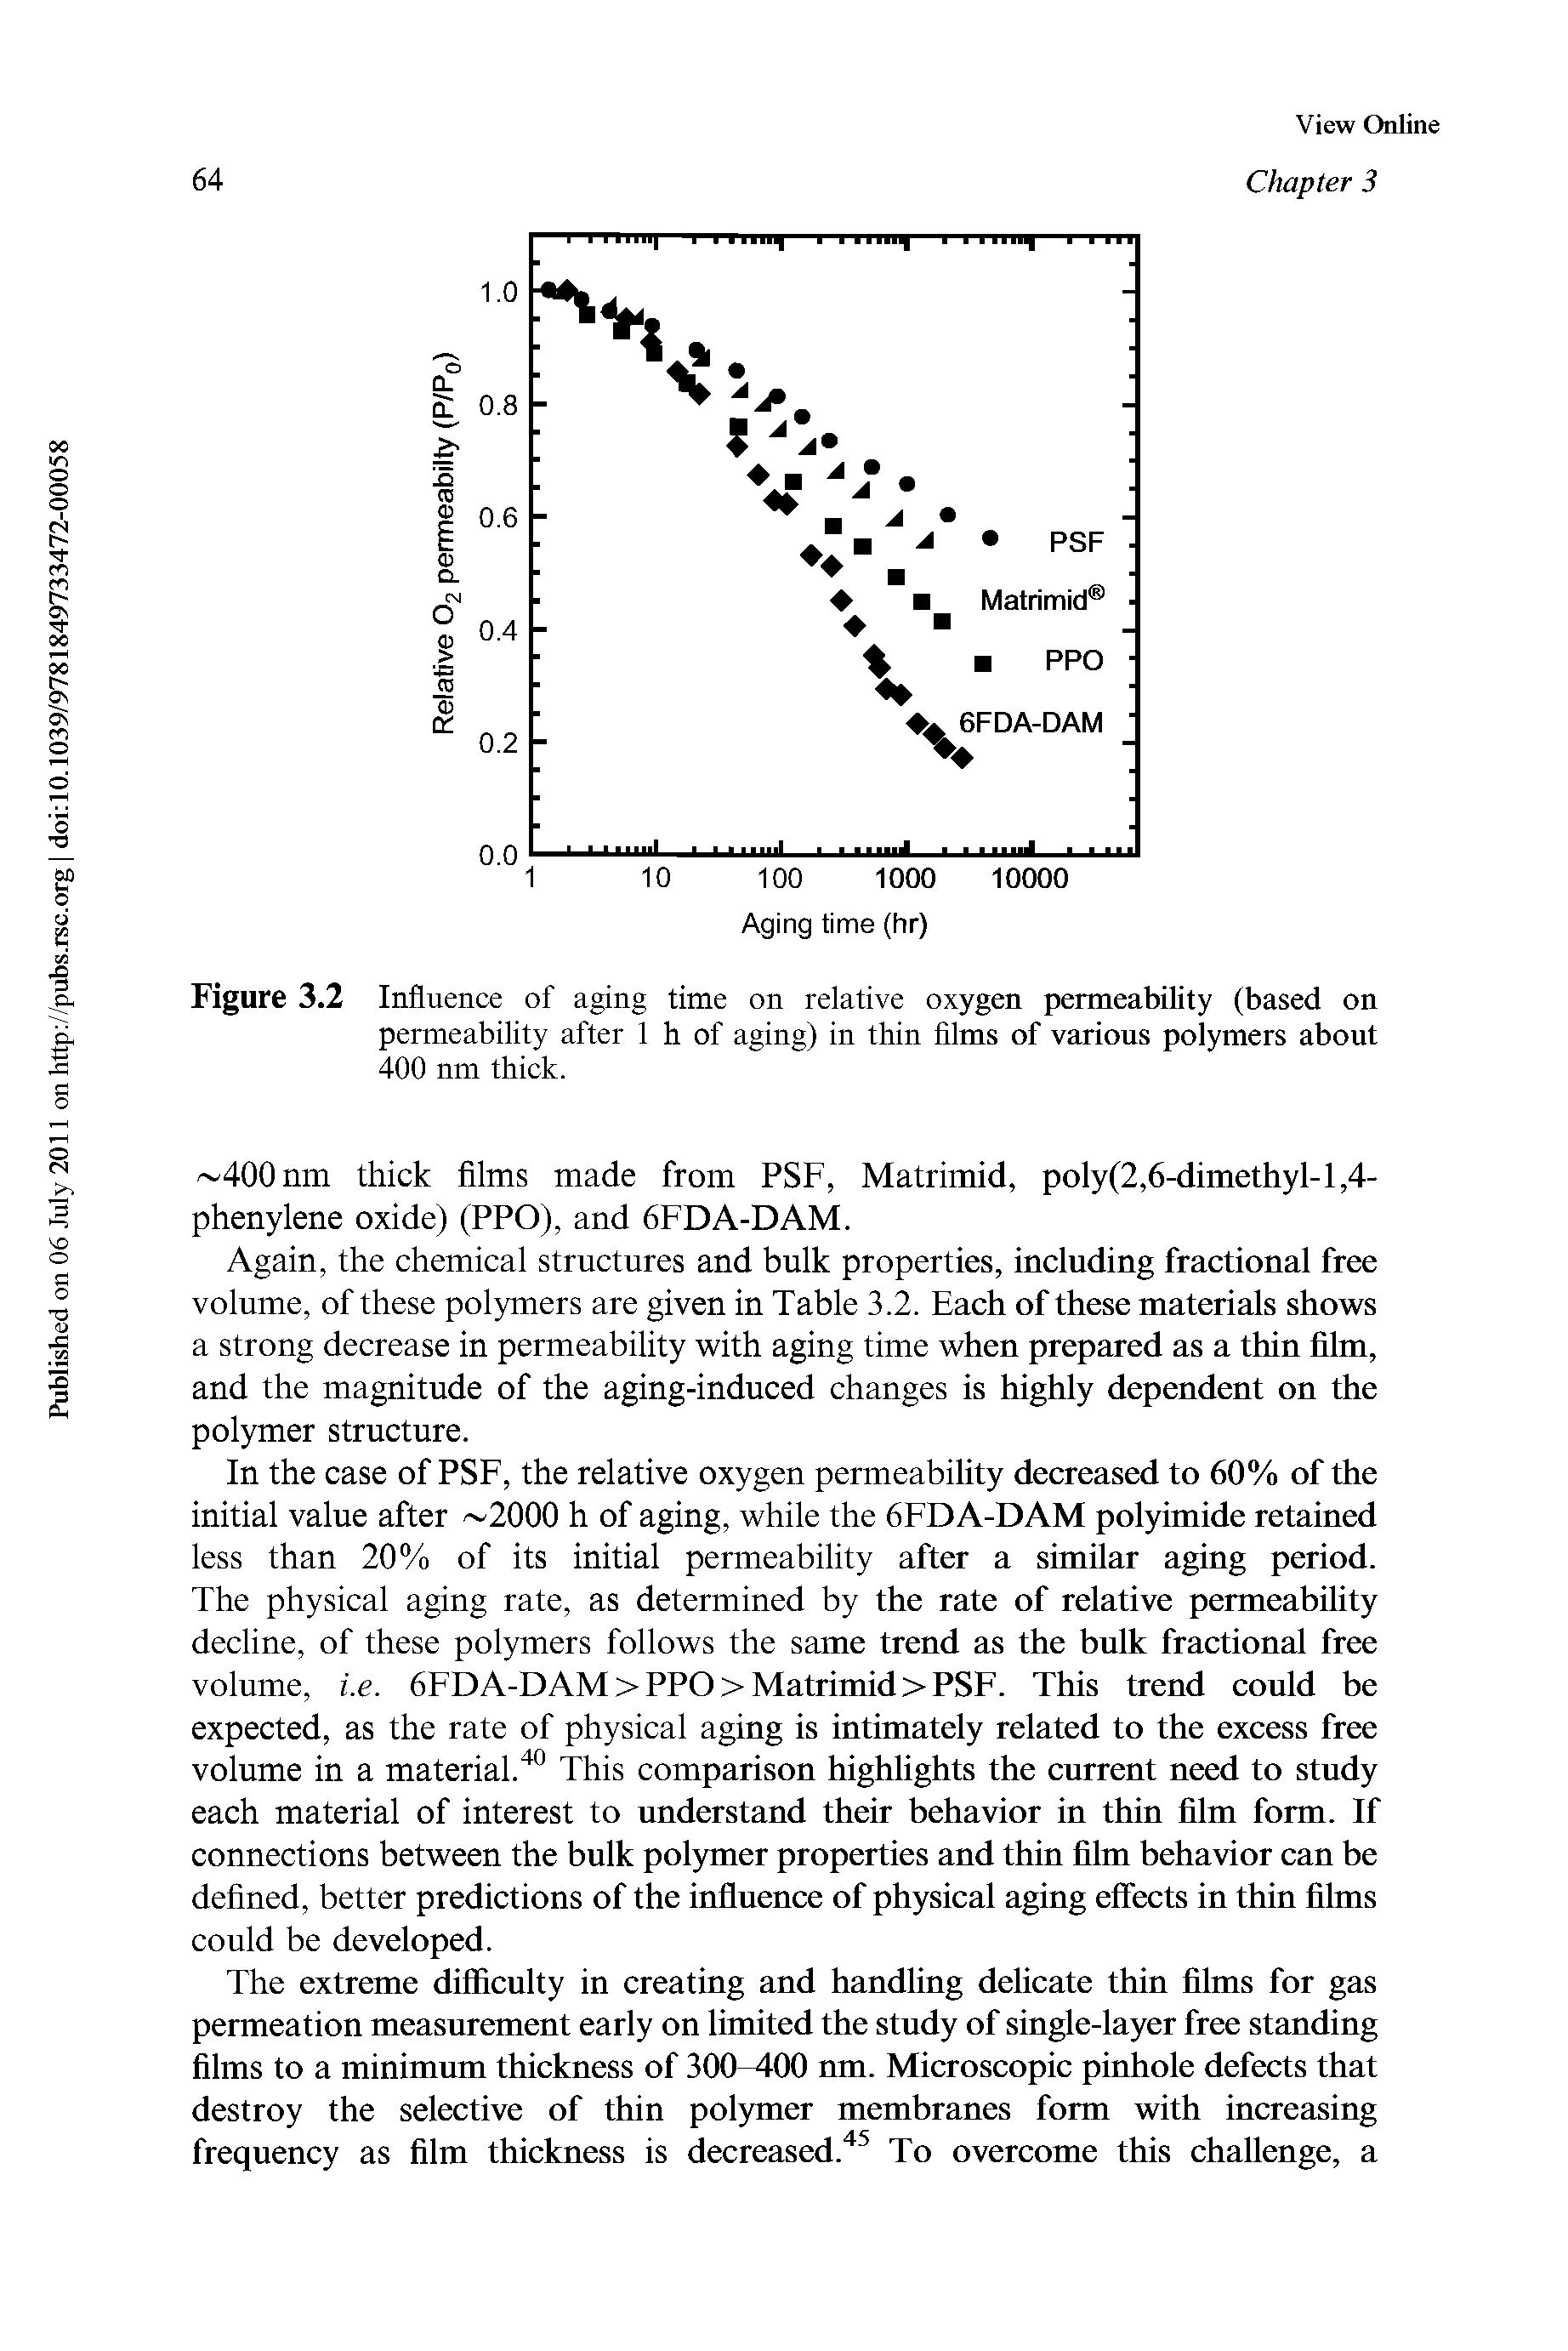 Figure 3.2 Influence of aging time on relative oxygen permeability (based on permeability after 1 h of aging) in thin films of various polymers about 400 nm thick.